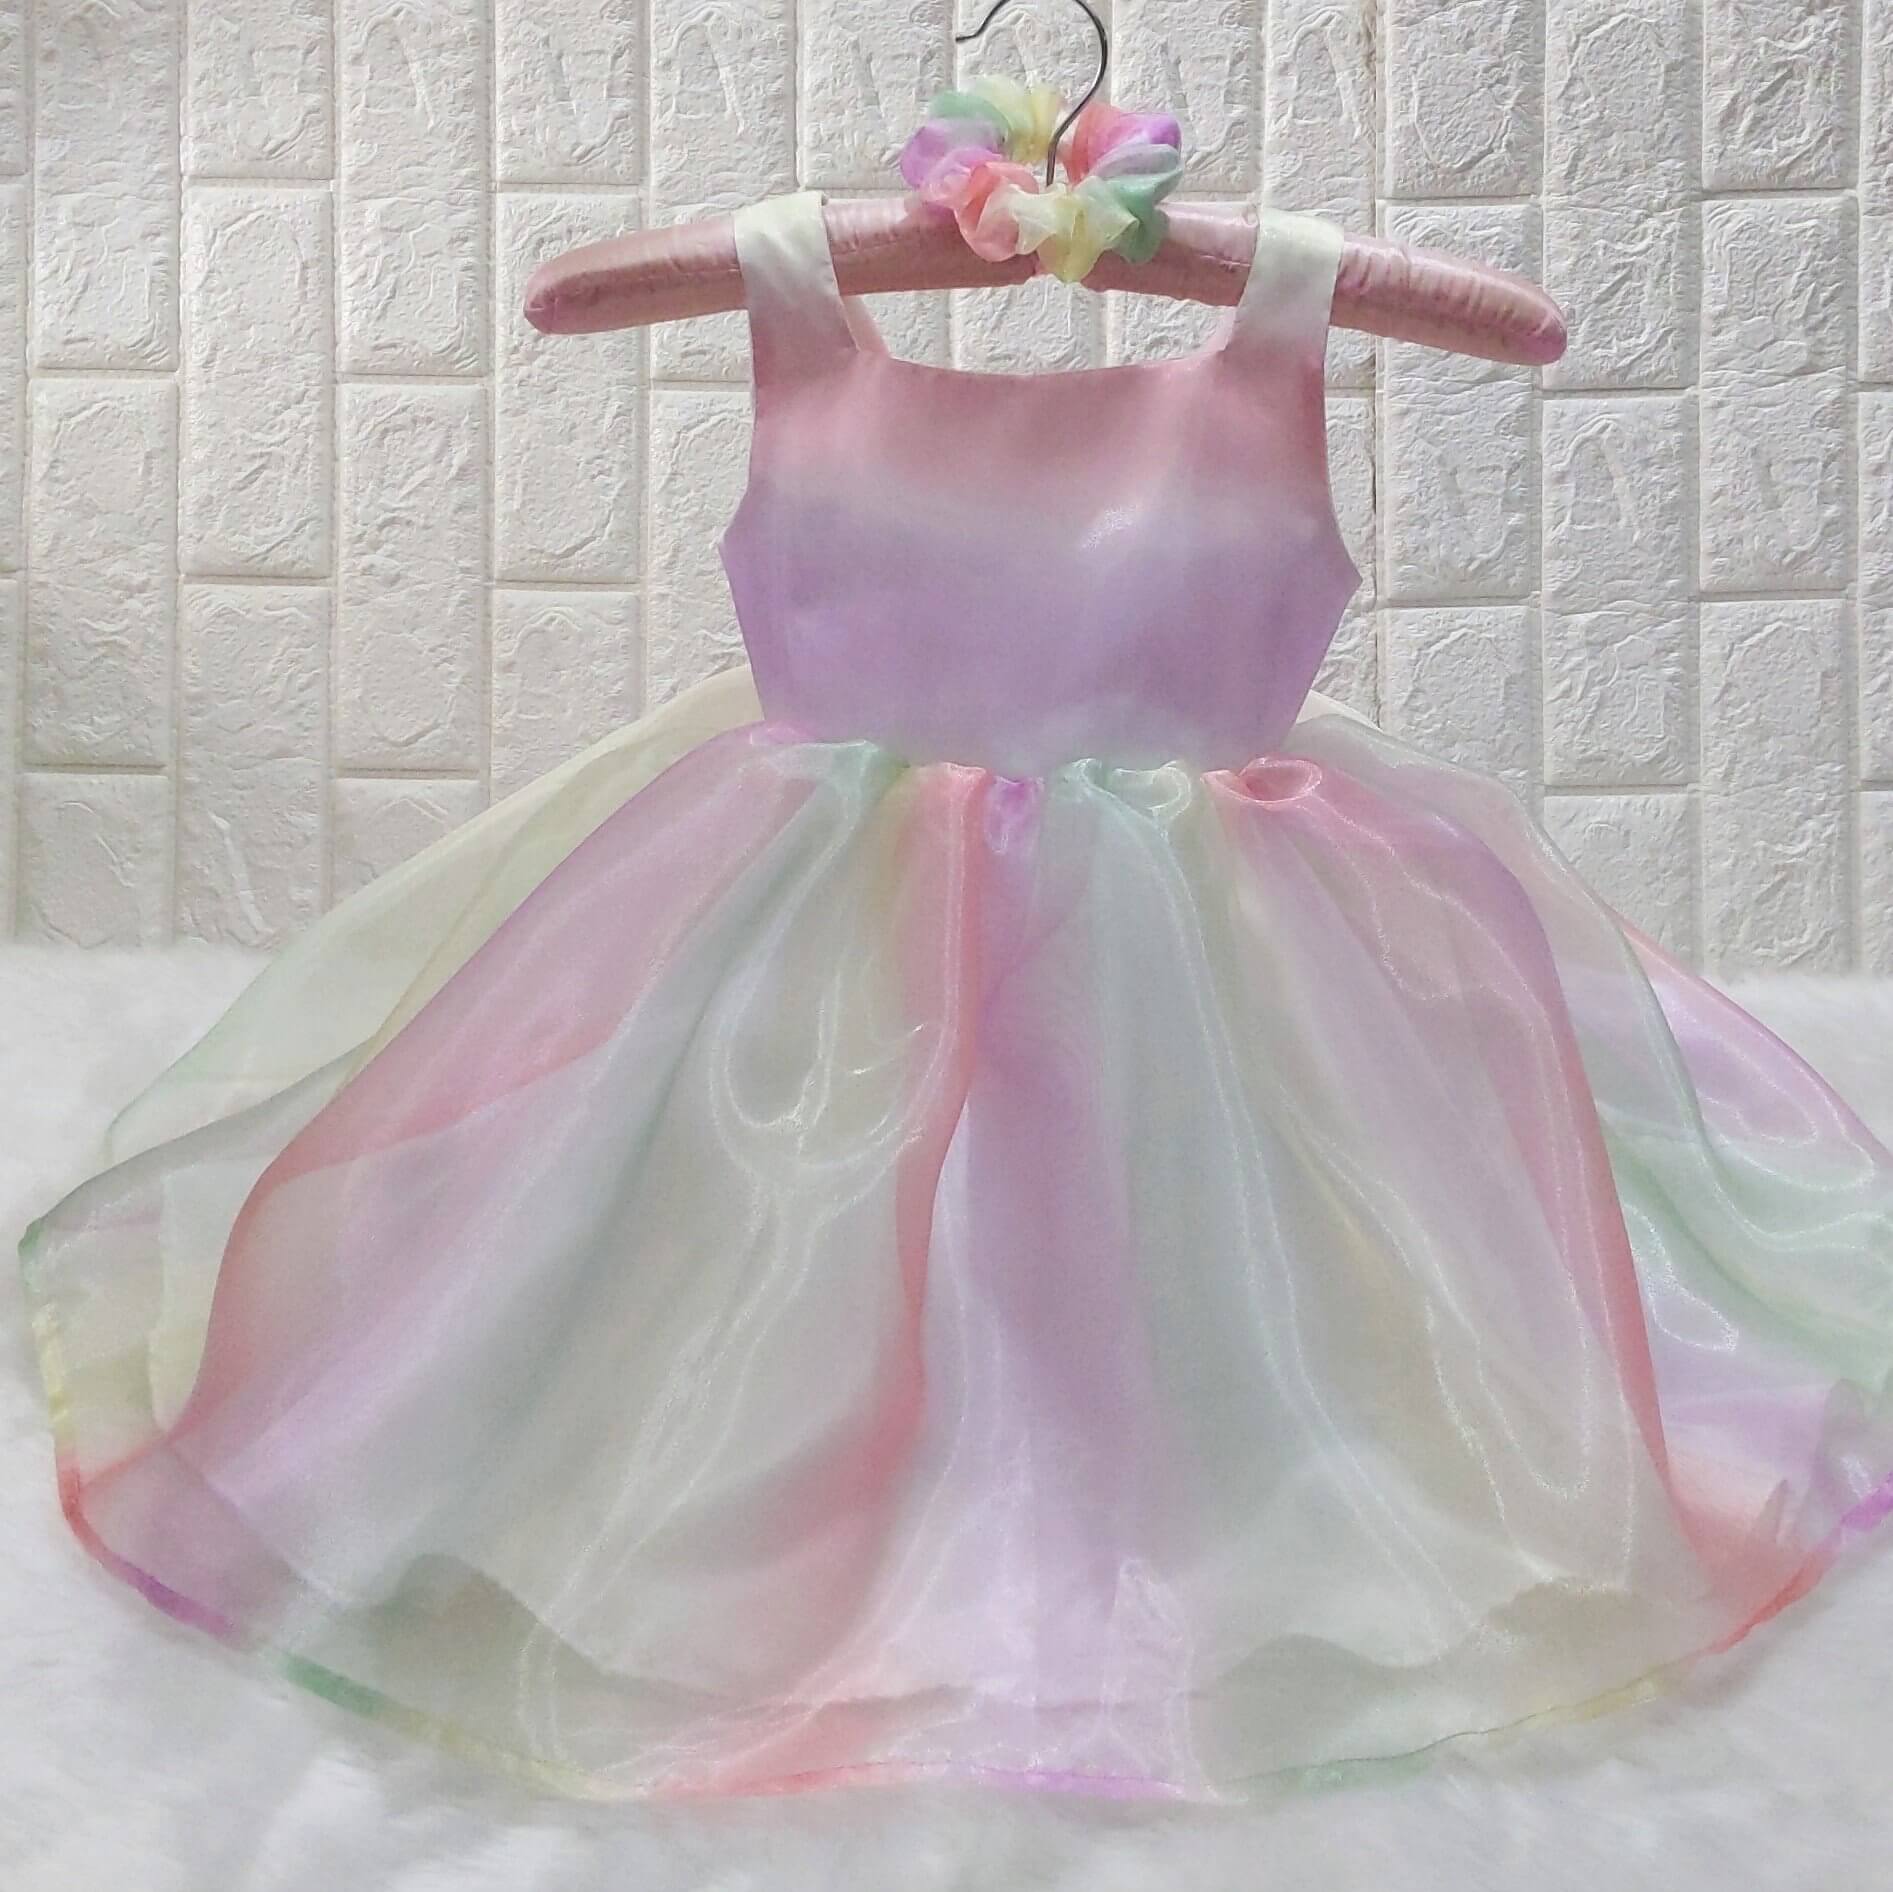 Unicorn theme dress for toddlers and little girls